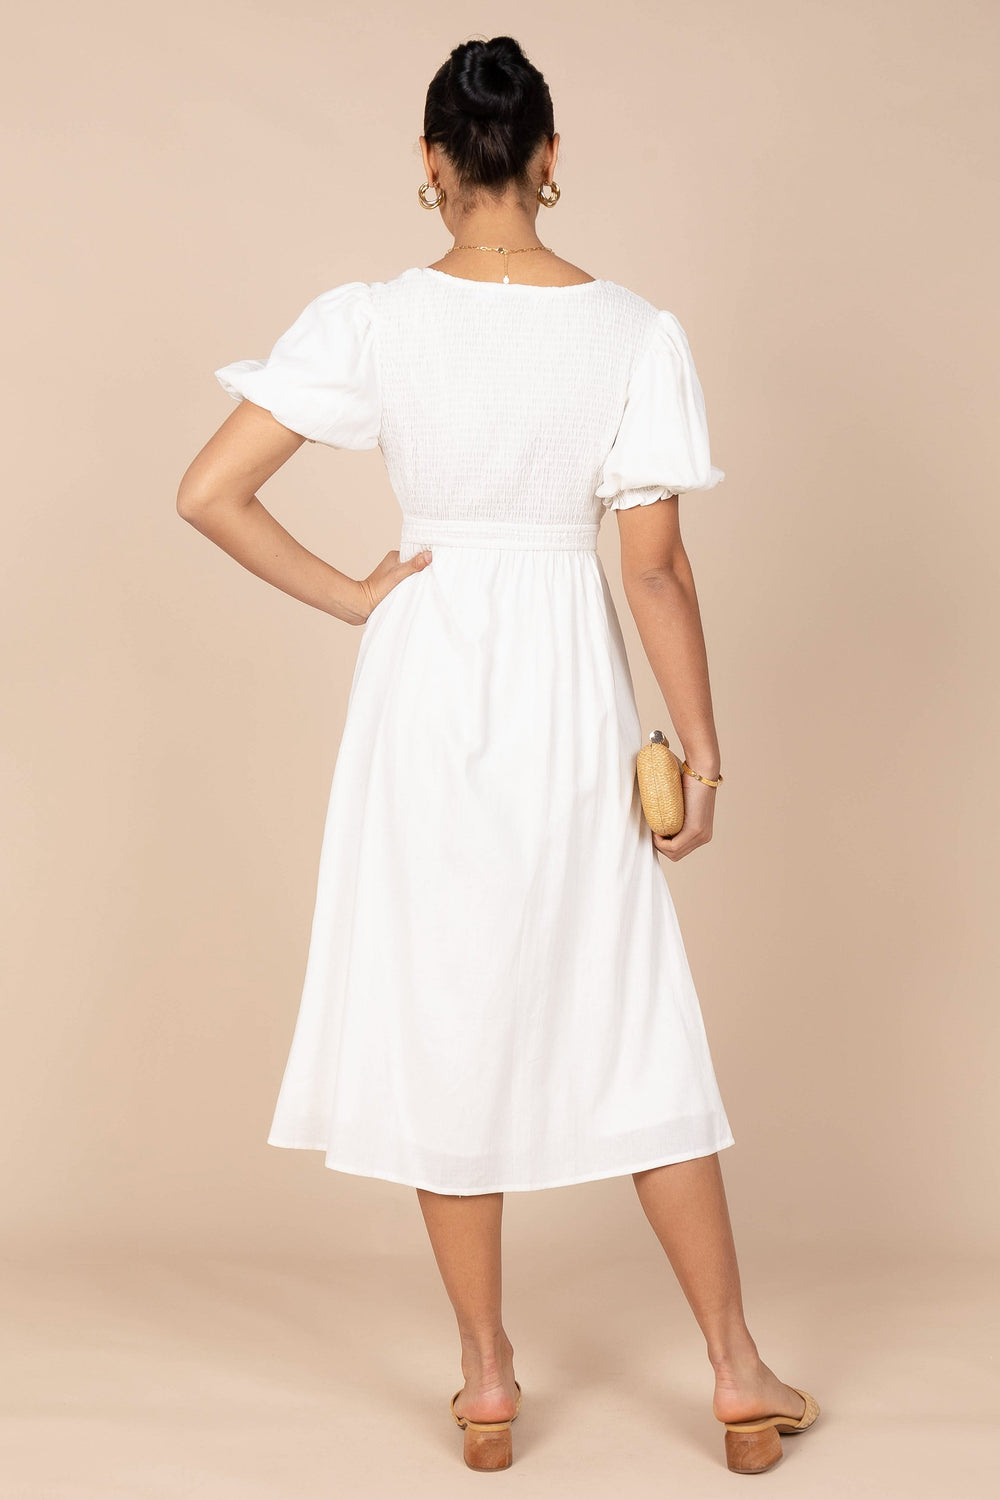 Petal and Pup USA DRESSES Belle Button Up Dress - White